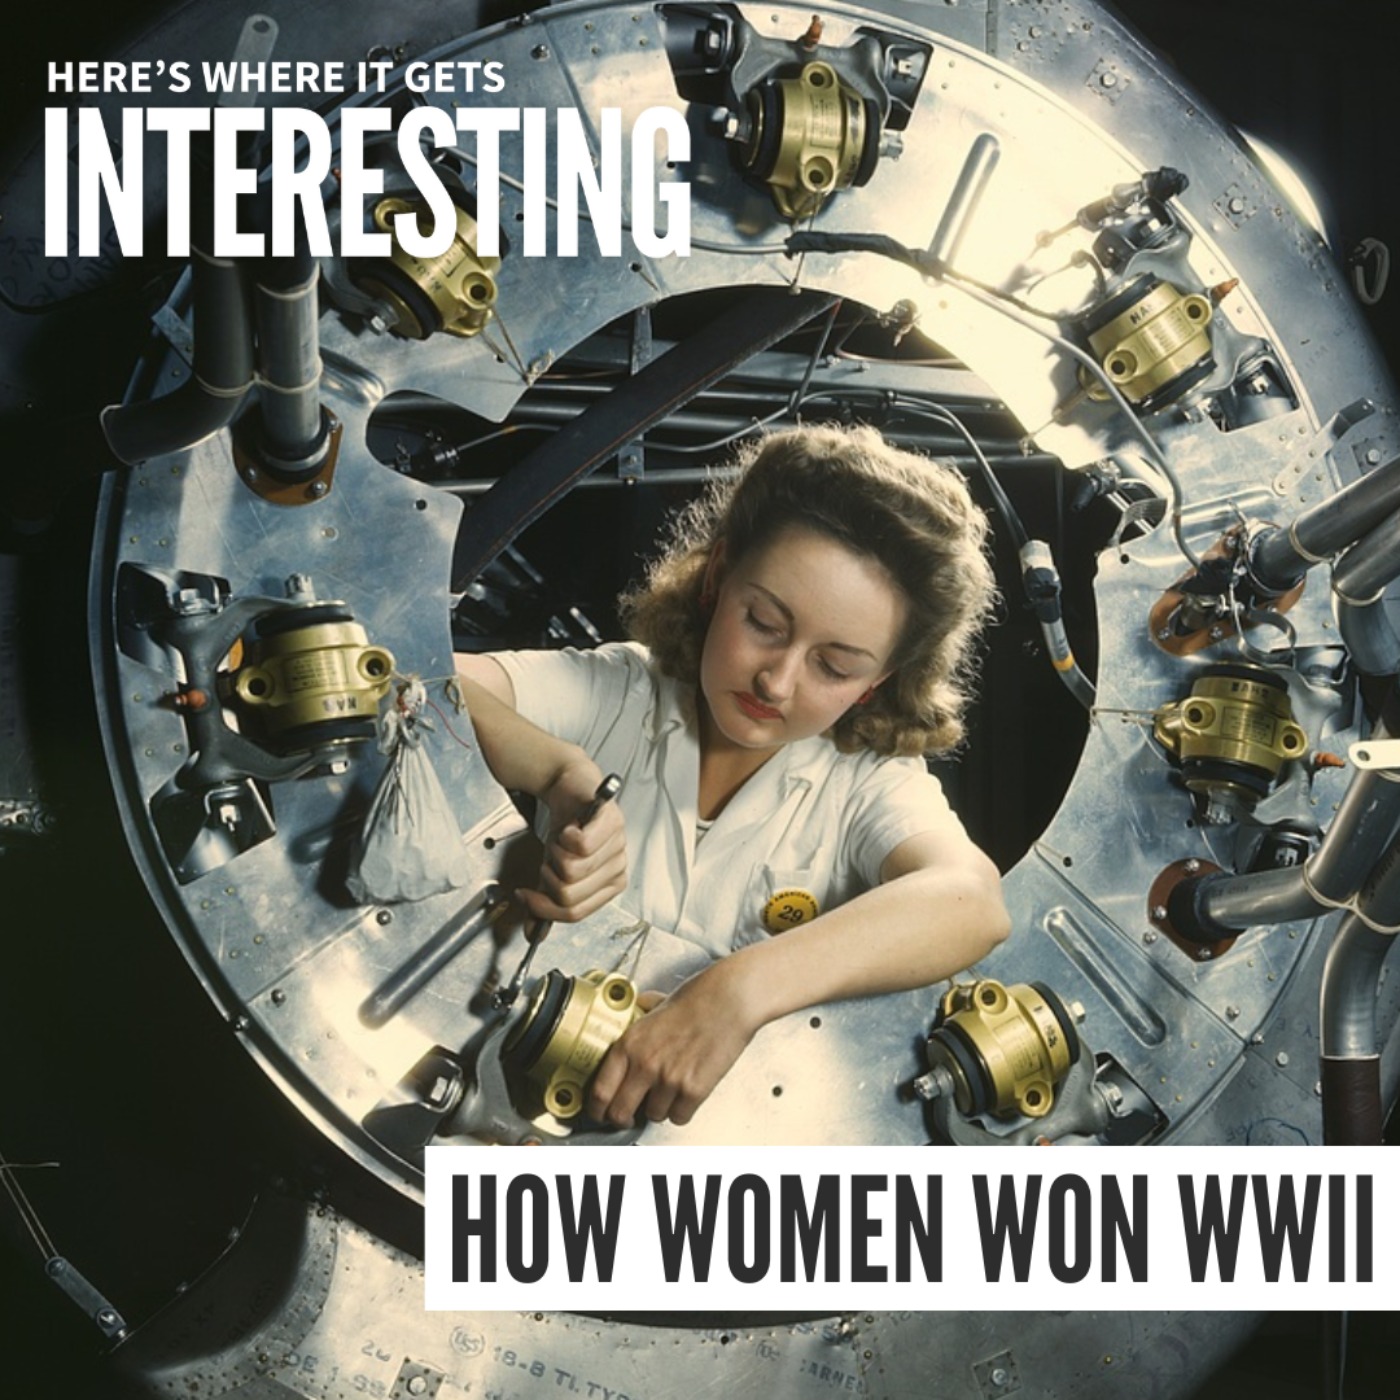 How Women Won WWII: Rosie the Riveter Was Just the Beginning